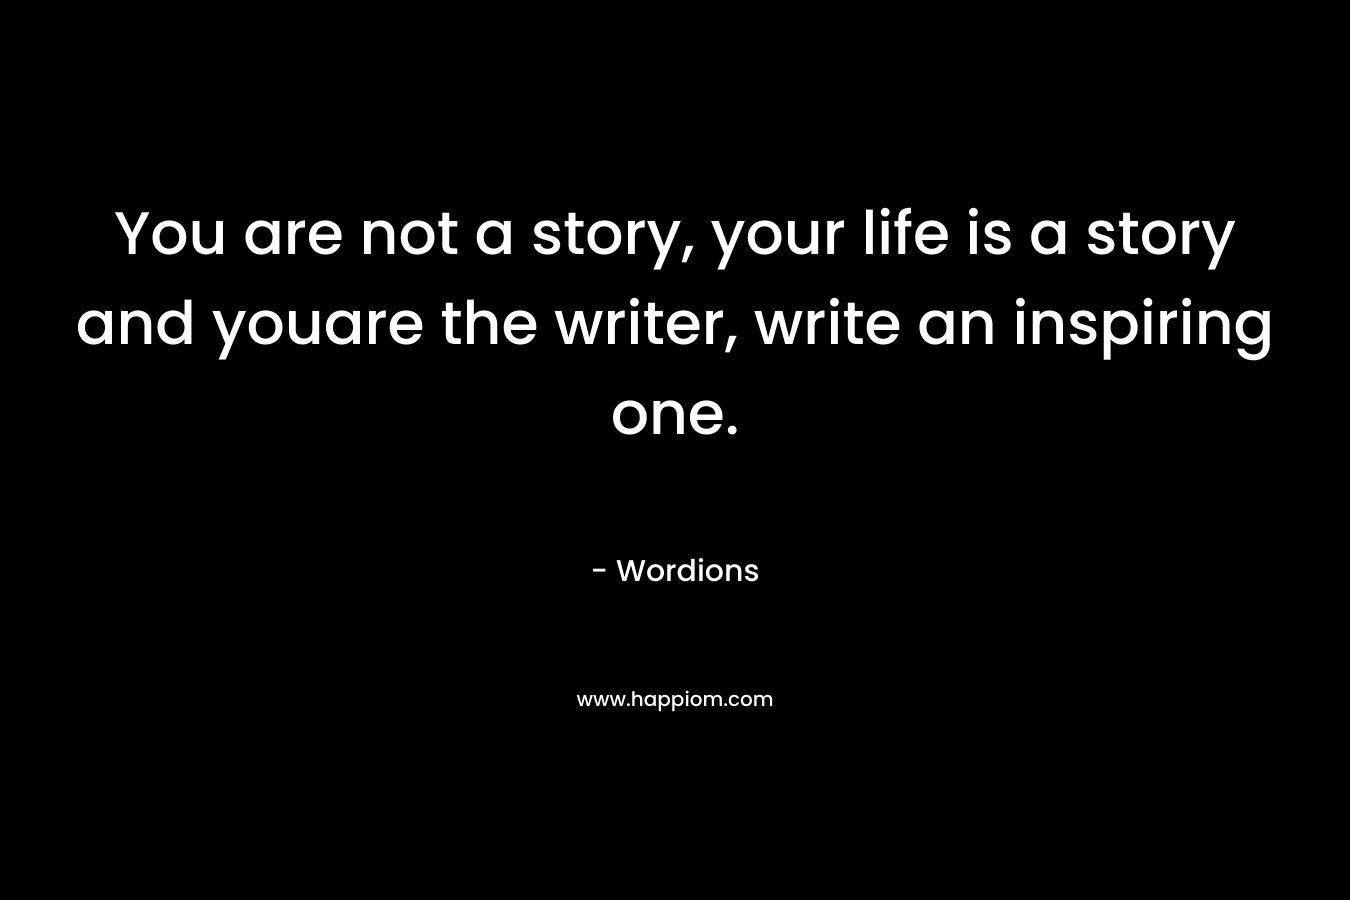 You are not a story, your life is a story and youare the writer, write an inspiring one. – Wordions